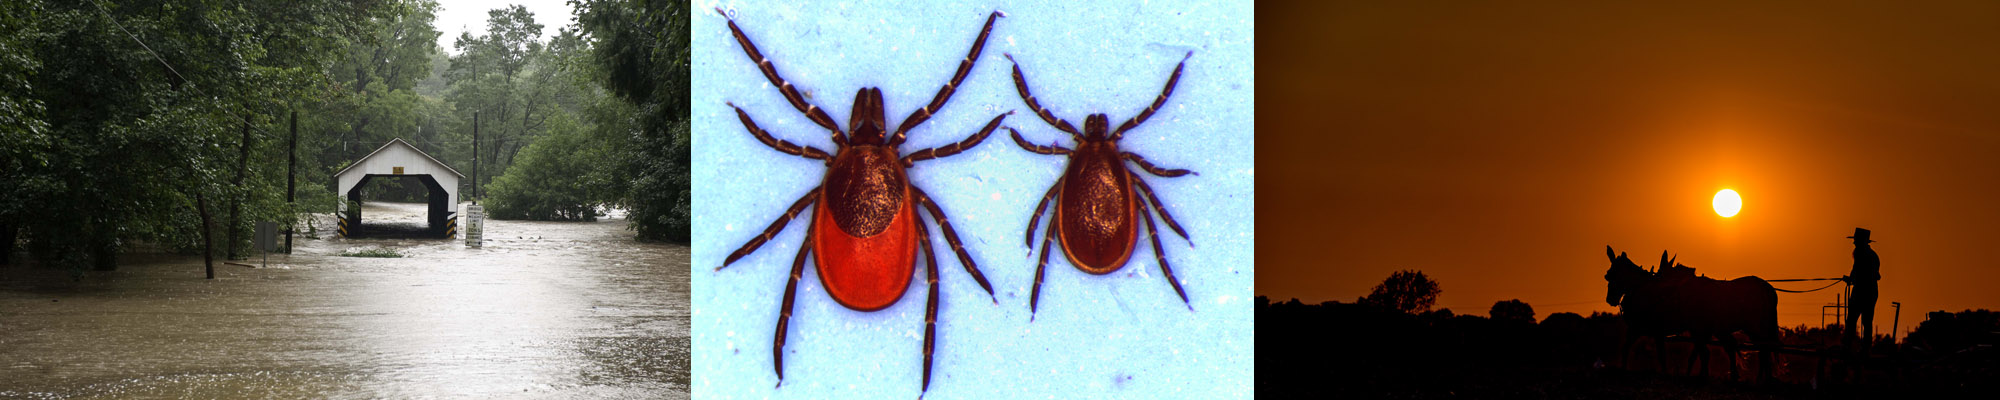 Flooding, ticks, and agriculture